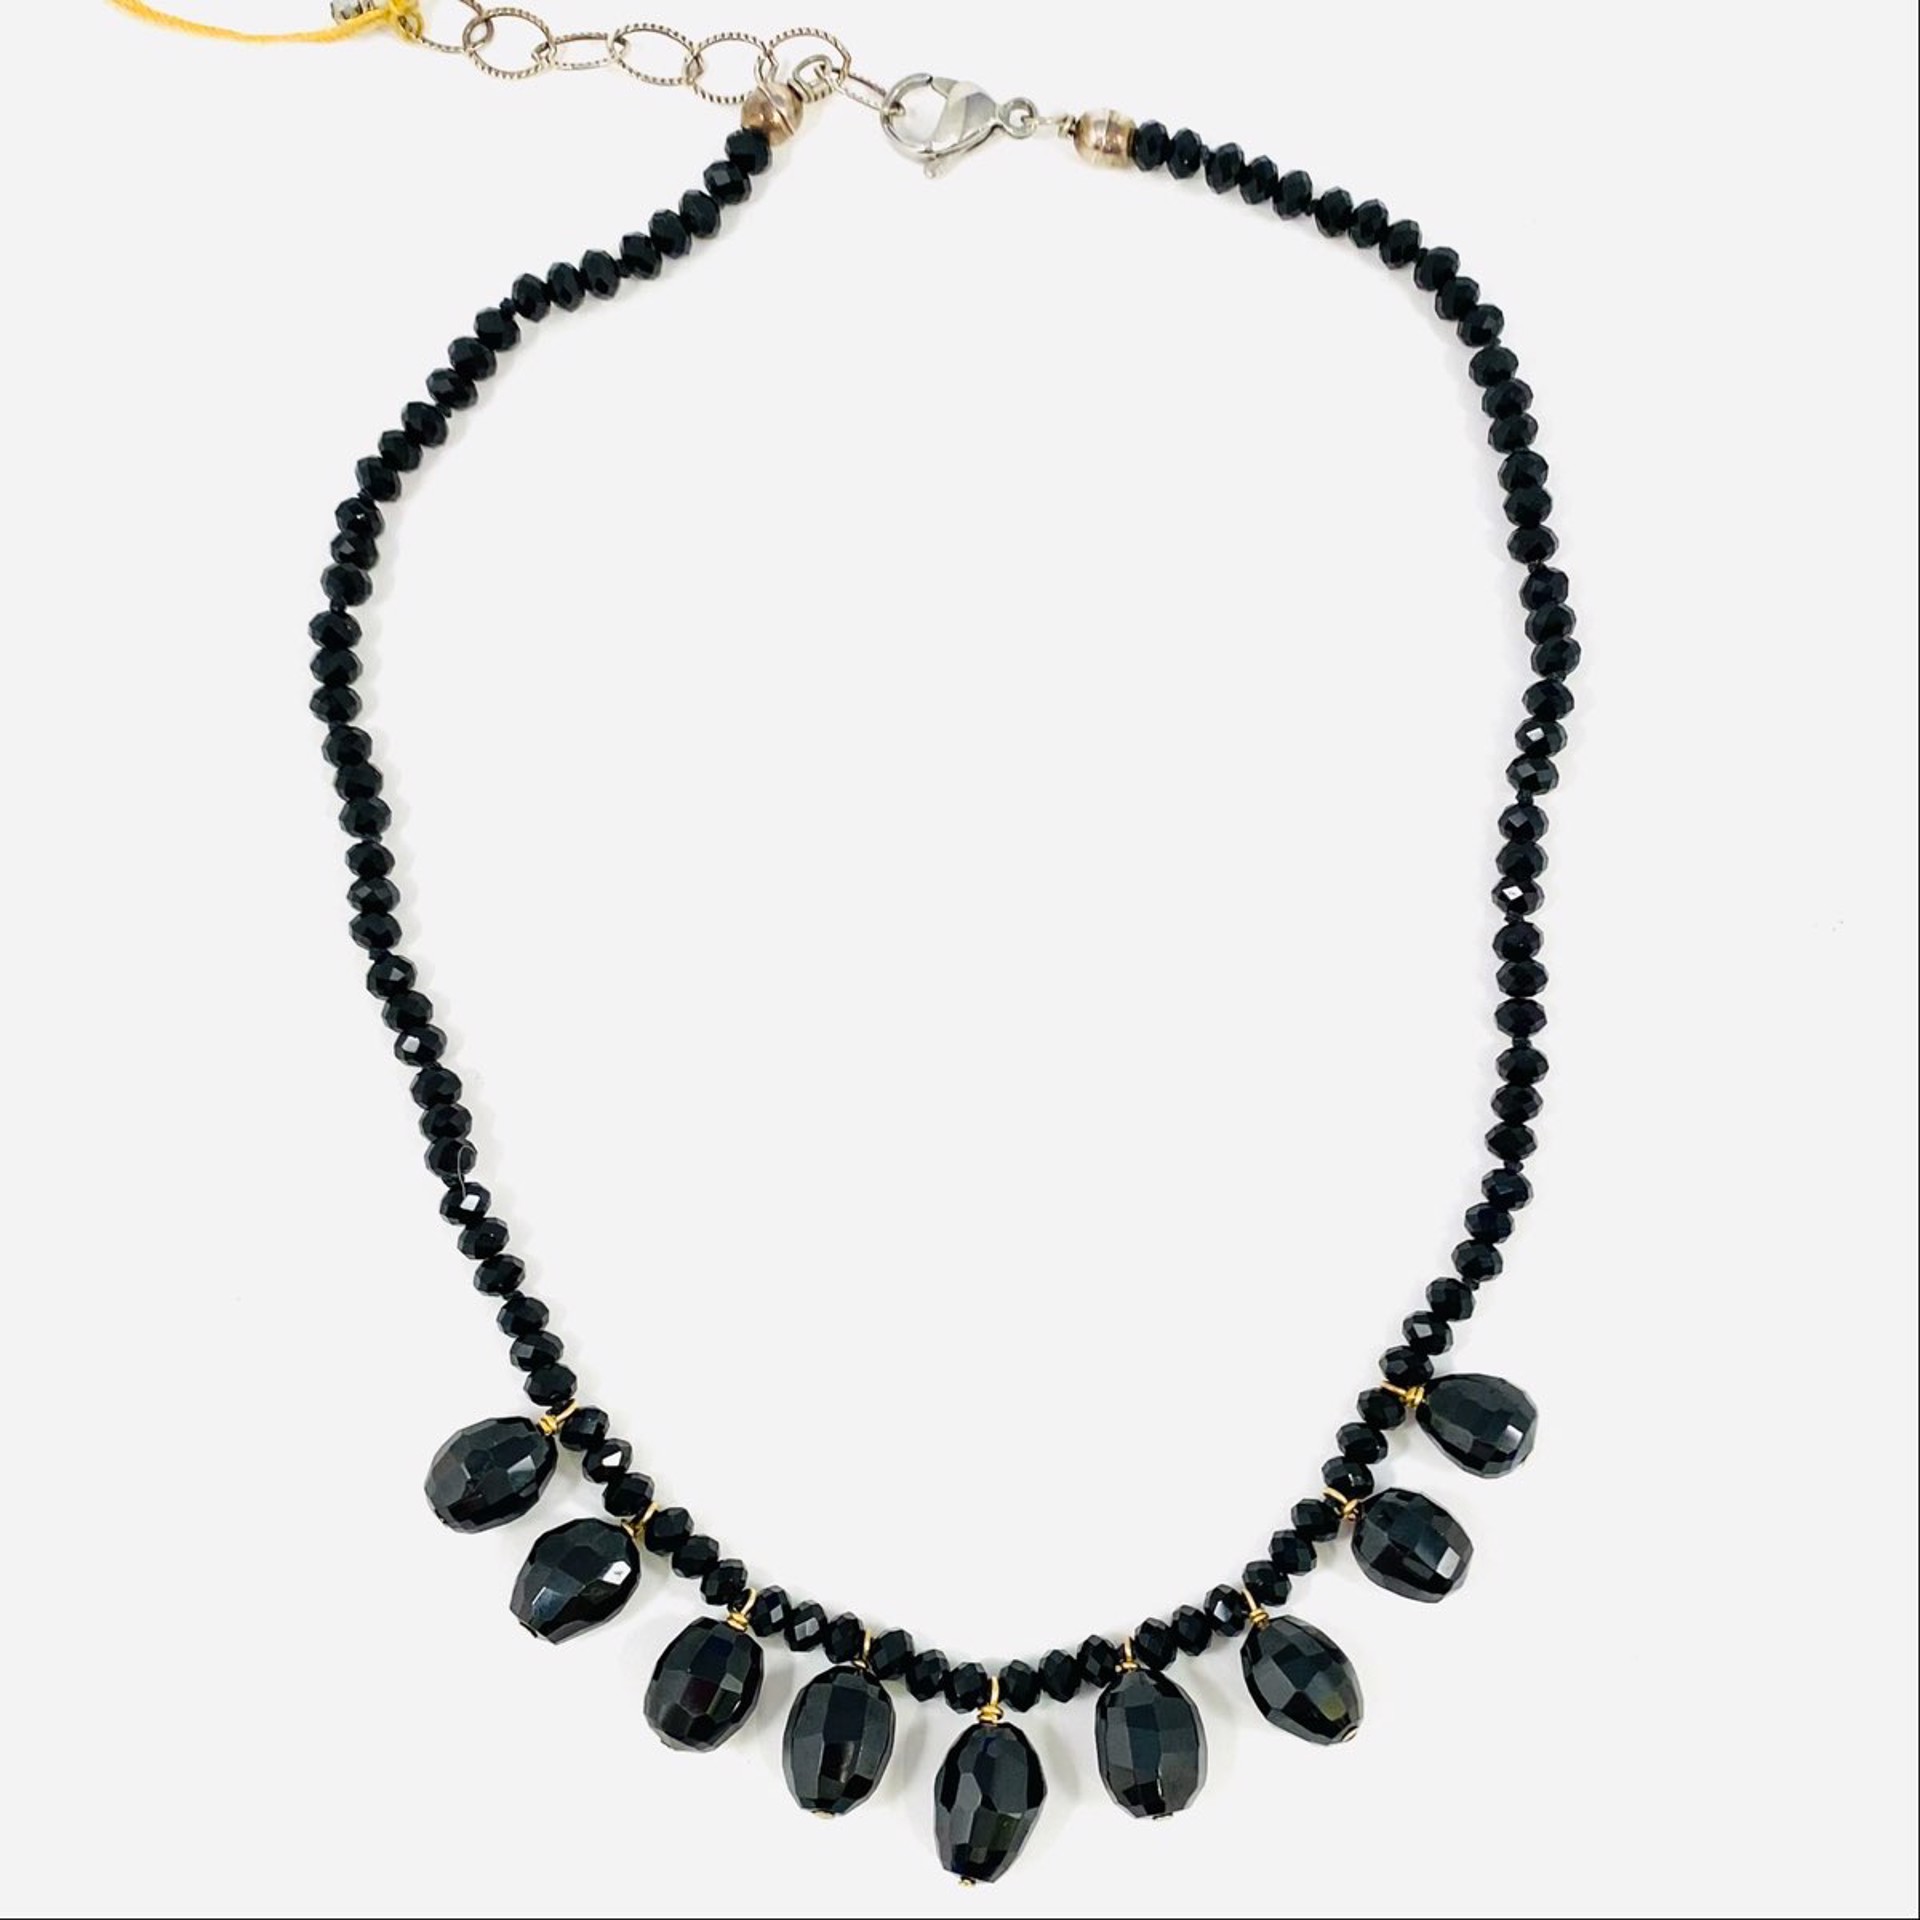 Faceted Black Crystal Bead Necklace by Soteria